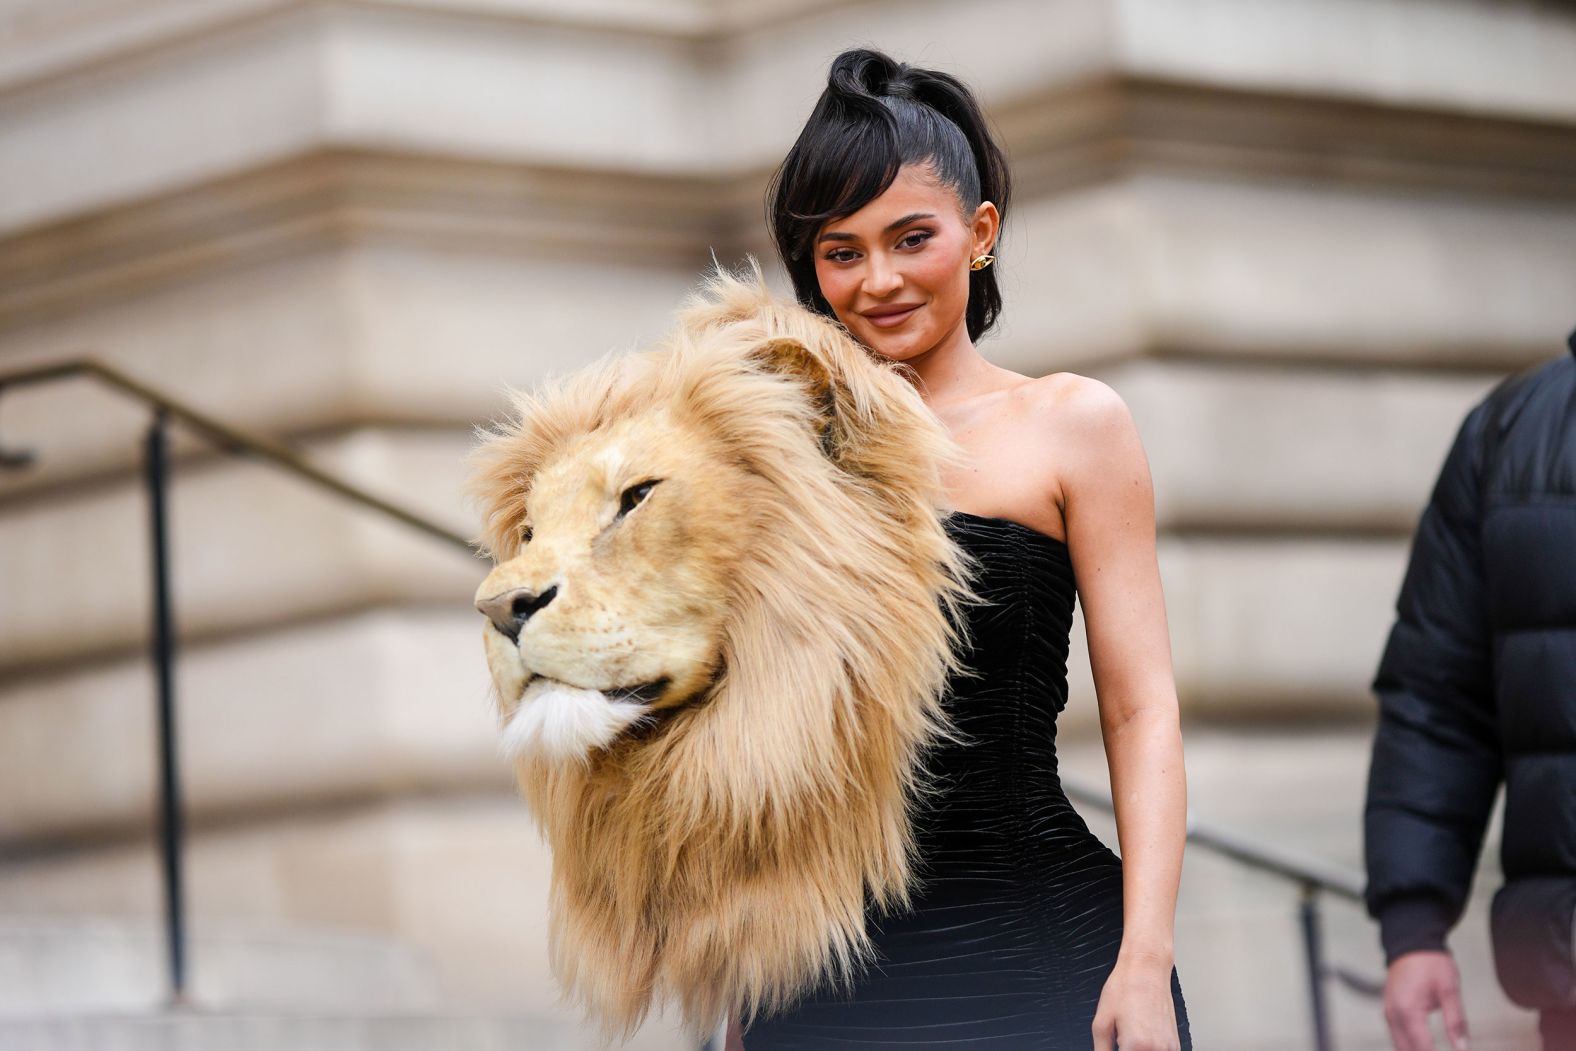 Kylie Jenner wears a strapless gown <a href="index.php?page=&url=https%3A%2F%2Fwww.cnn.com%2Fstyle%2Farticle%2Fkylie-jenner-lion-head-dress-schiaparelli-haute-couture-week%2Findex.html" target="_blank">adorned with a faux lion's head</a> as she arrives for a Schiaparelli couture show in Paris on Monday, January 23.